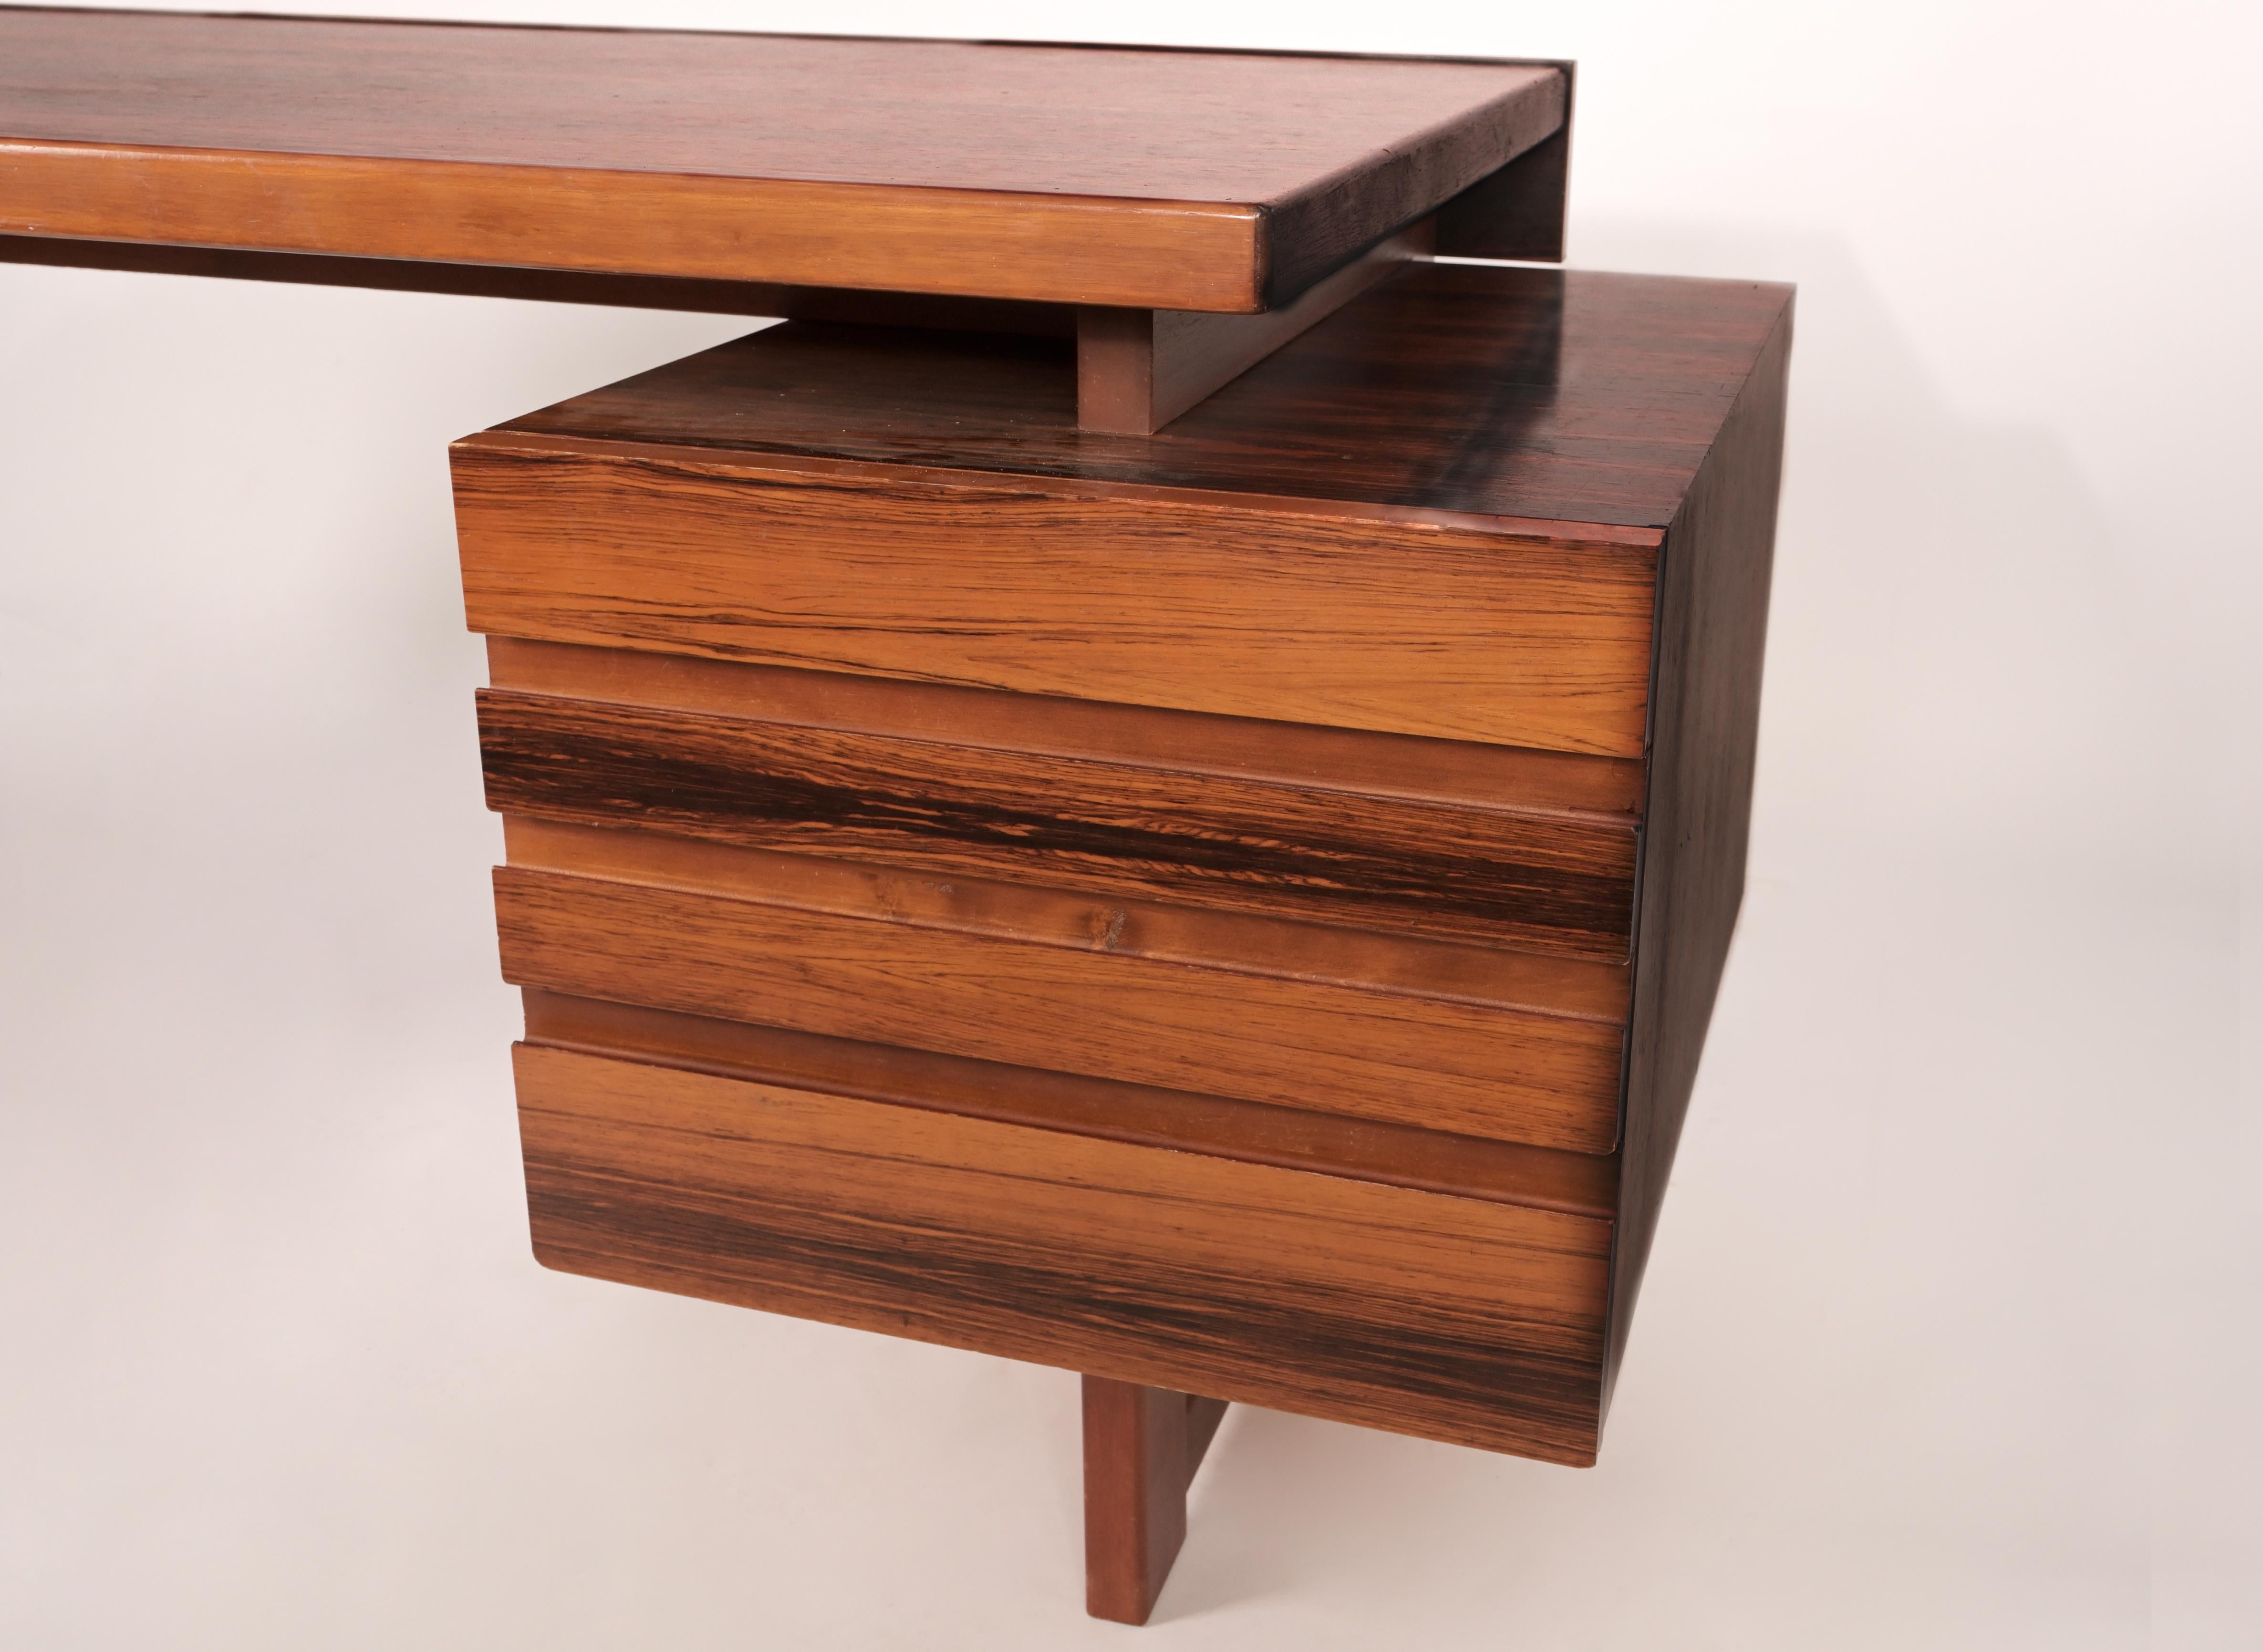 A Scandinavian Modern desk with highly figured rosewood veneered carcass. Designed by Olavi Hänninen (Finnish 1920-1992) for HMN Huonekalu Mikko Nuppone, Lahti 1960s. Veneered in Rio Palisander.  The knee hole opening have four drawers on either